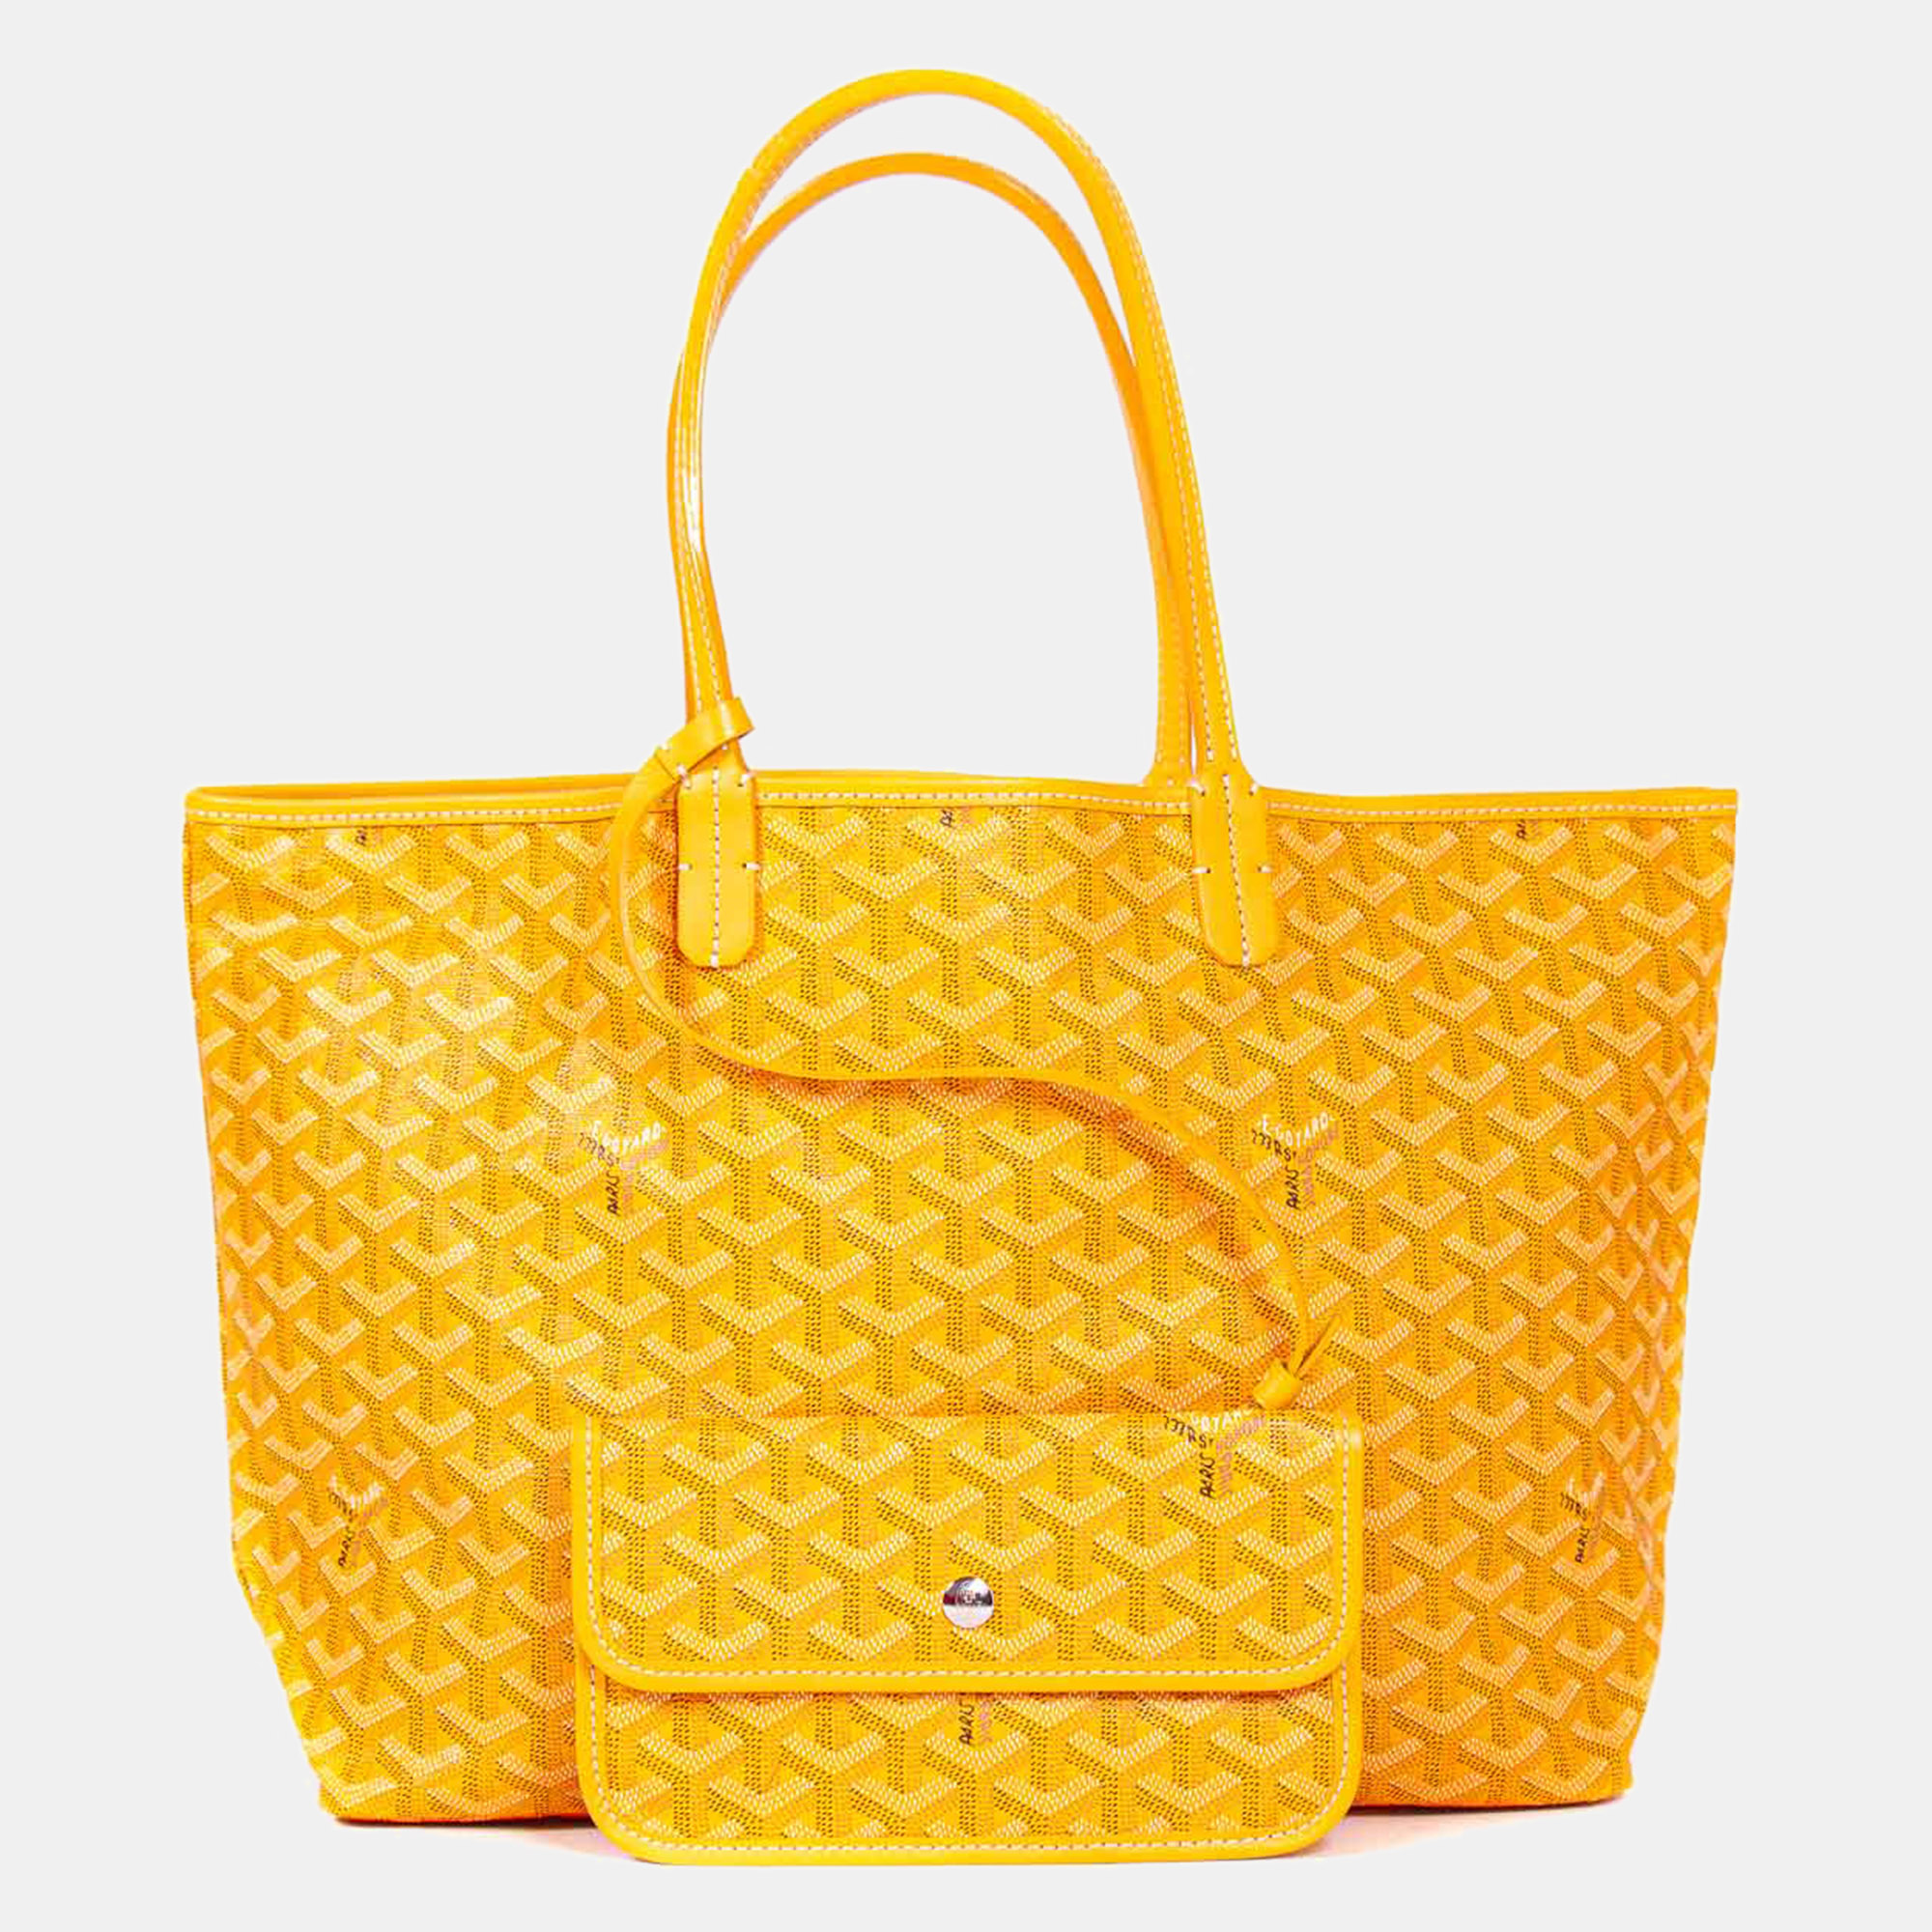 The Saint Louis tote is a Goyard icon that is perfectly made to accompany you every day. It is a testament to high quality durability and classic appeal.